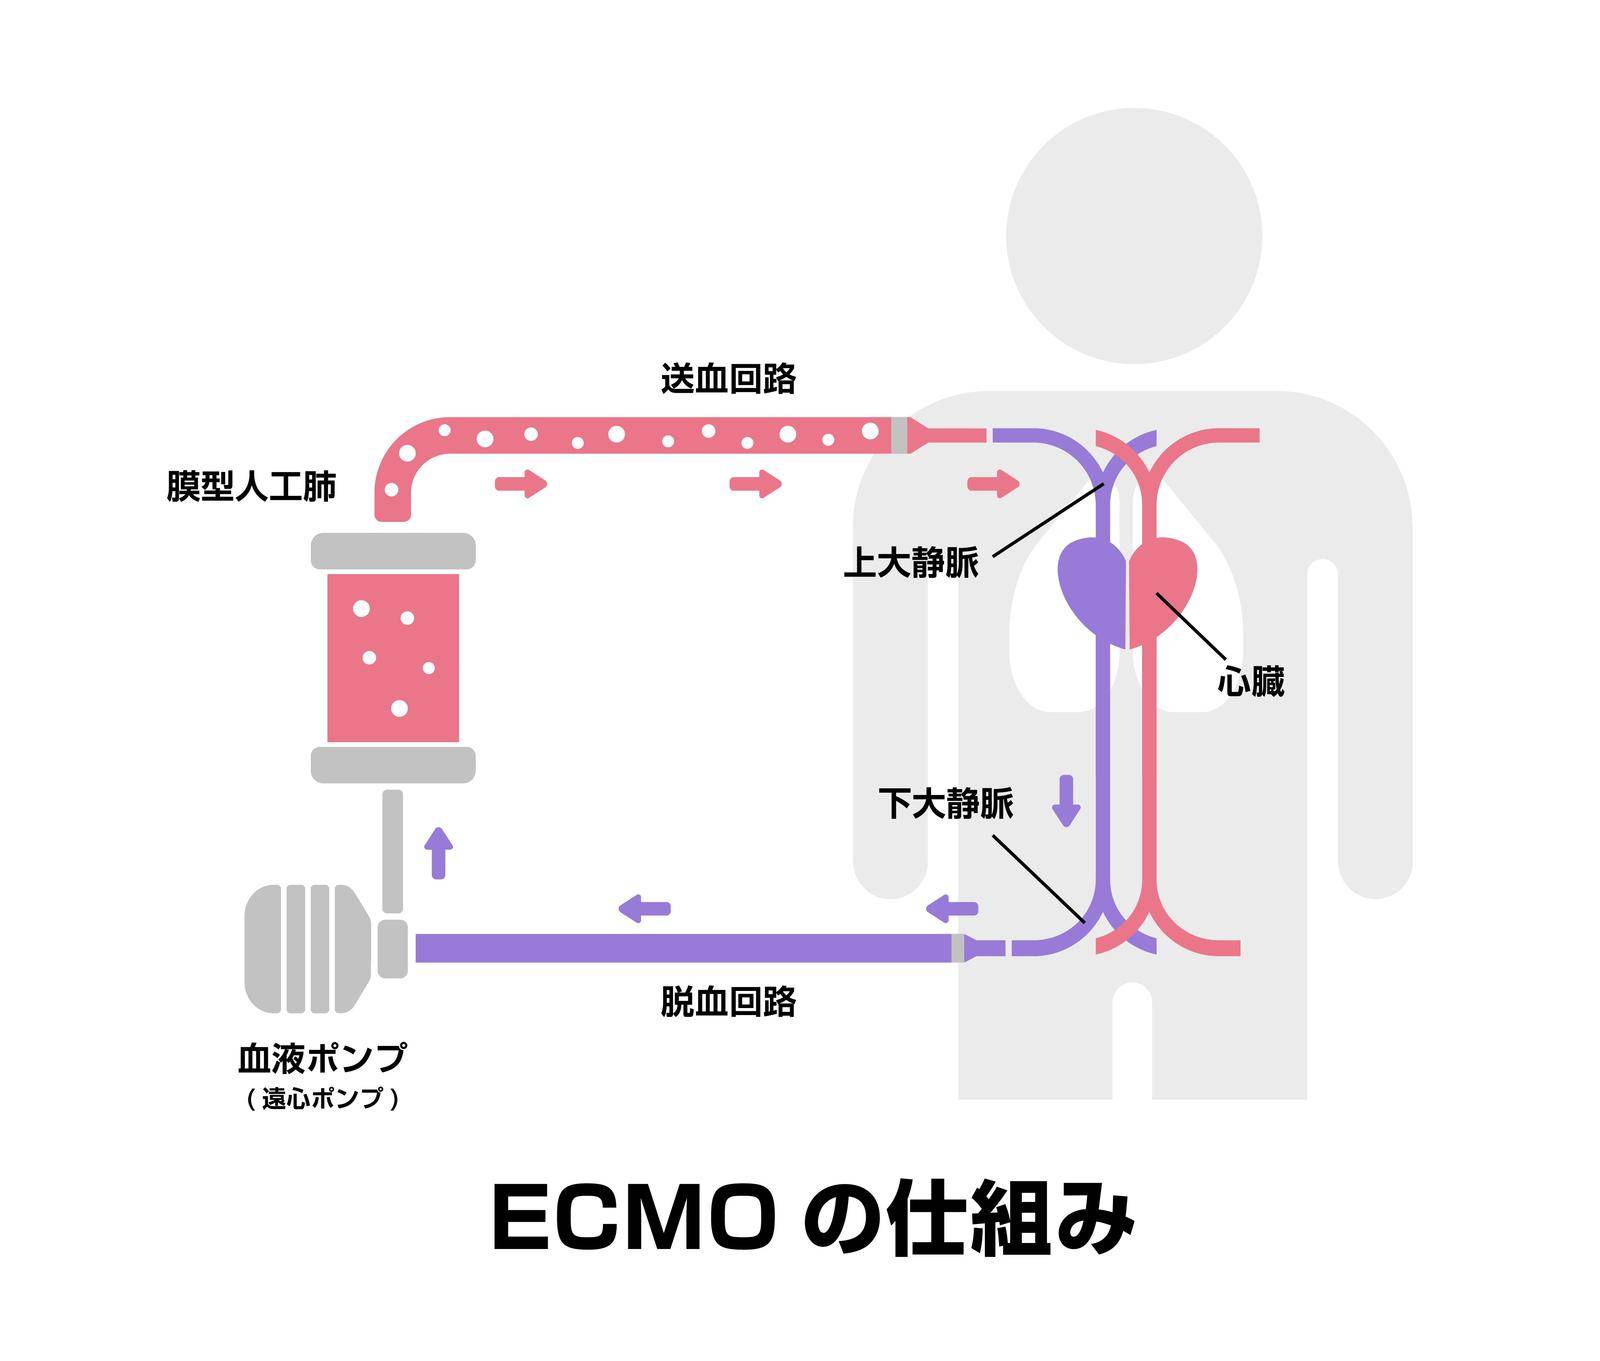 ECMO ( Extracorporeal membrane oxygenation ) structure vector illustration / Japanese